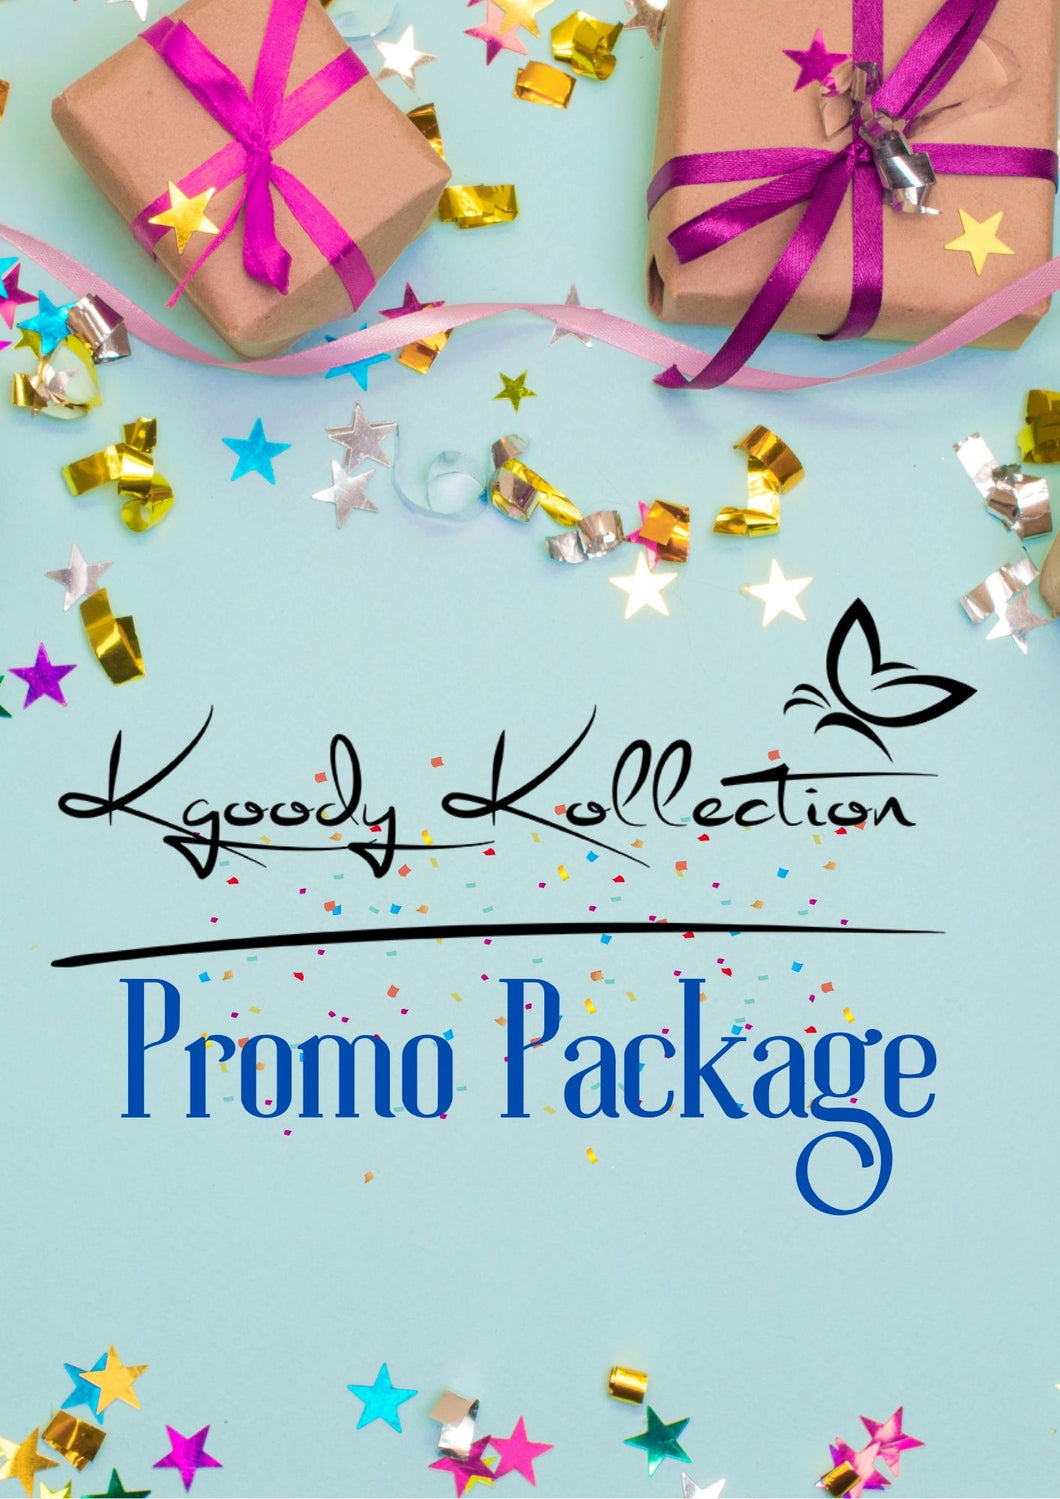 Promo Package